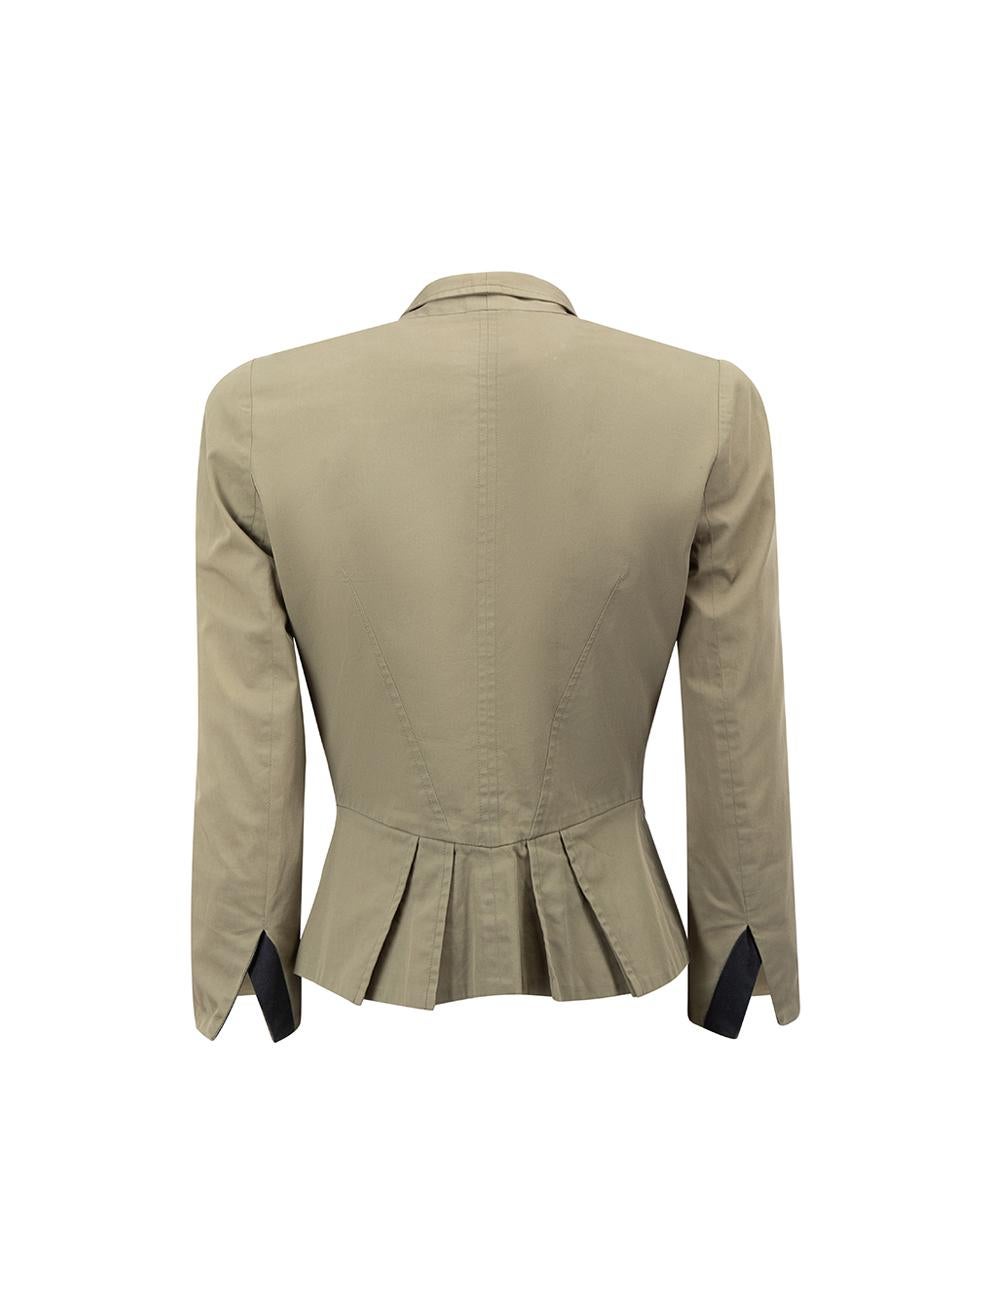 Alexander McQueen Women's McQ Khaki Lace Up Detail Jacket In Good Condition For Sale In London, GB